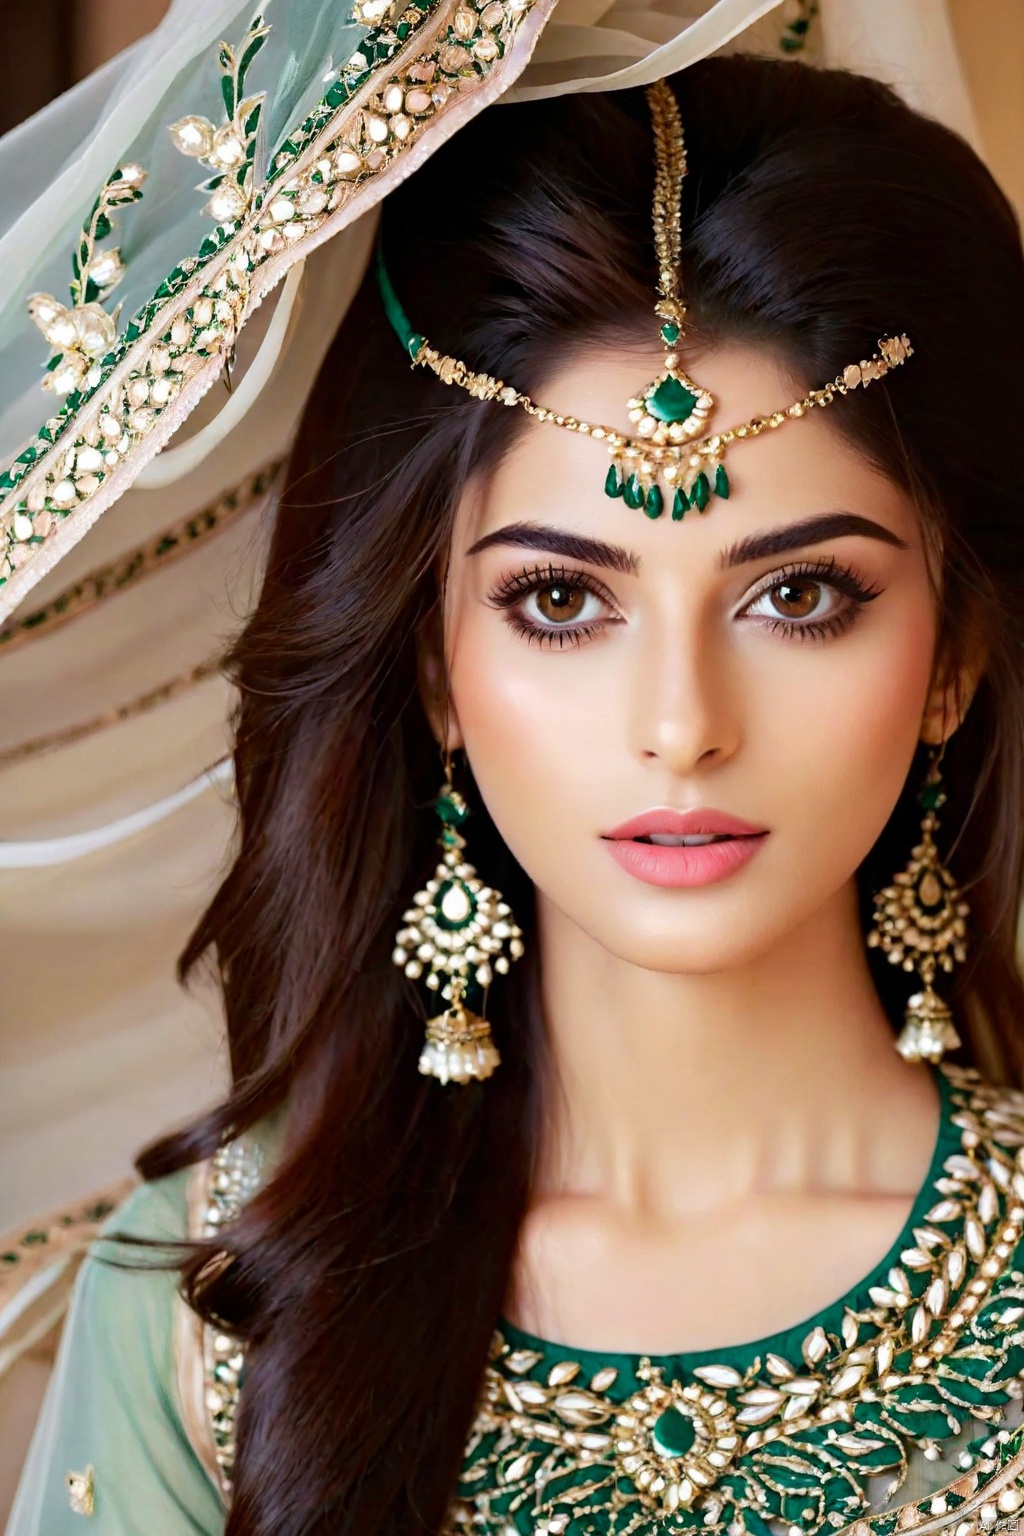  a beautiful pakistani girl who is a celebrity, has perfect symetric and aesthetic face structure, and is the personification of exotic, classy aestheticamazight